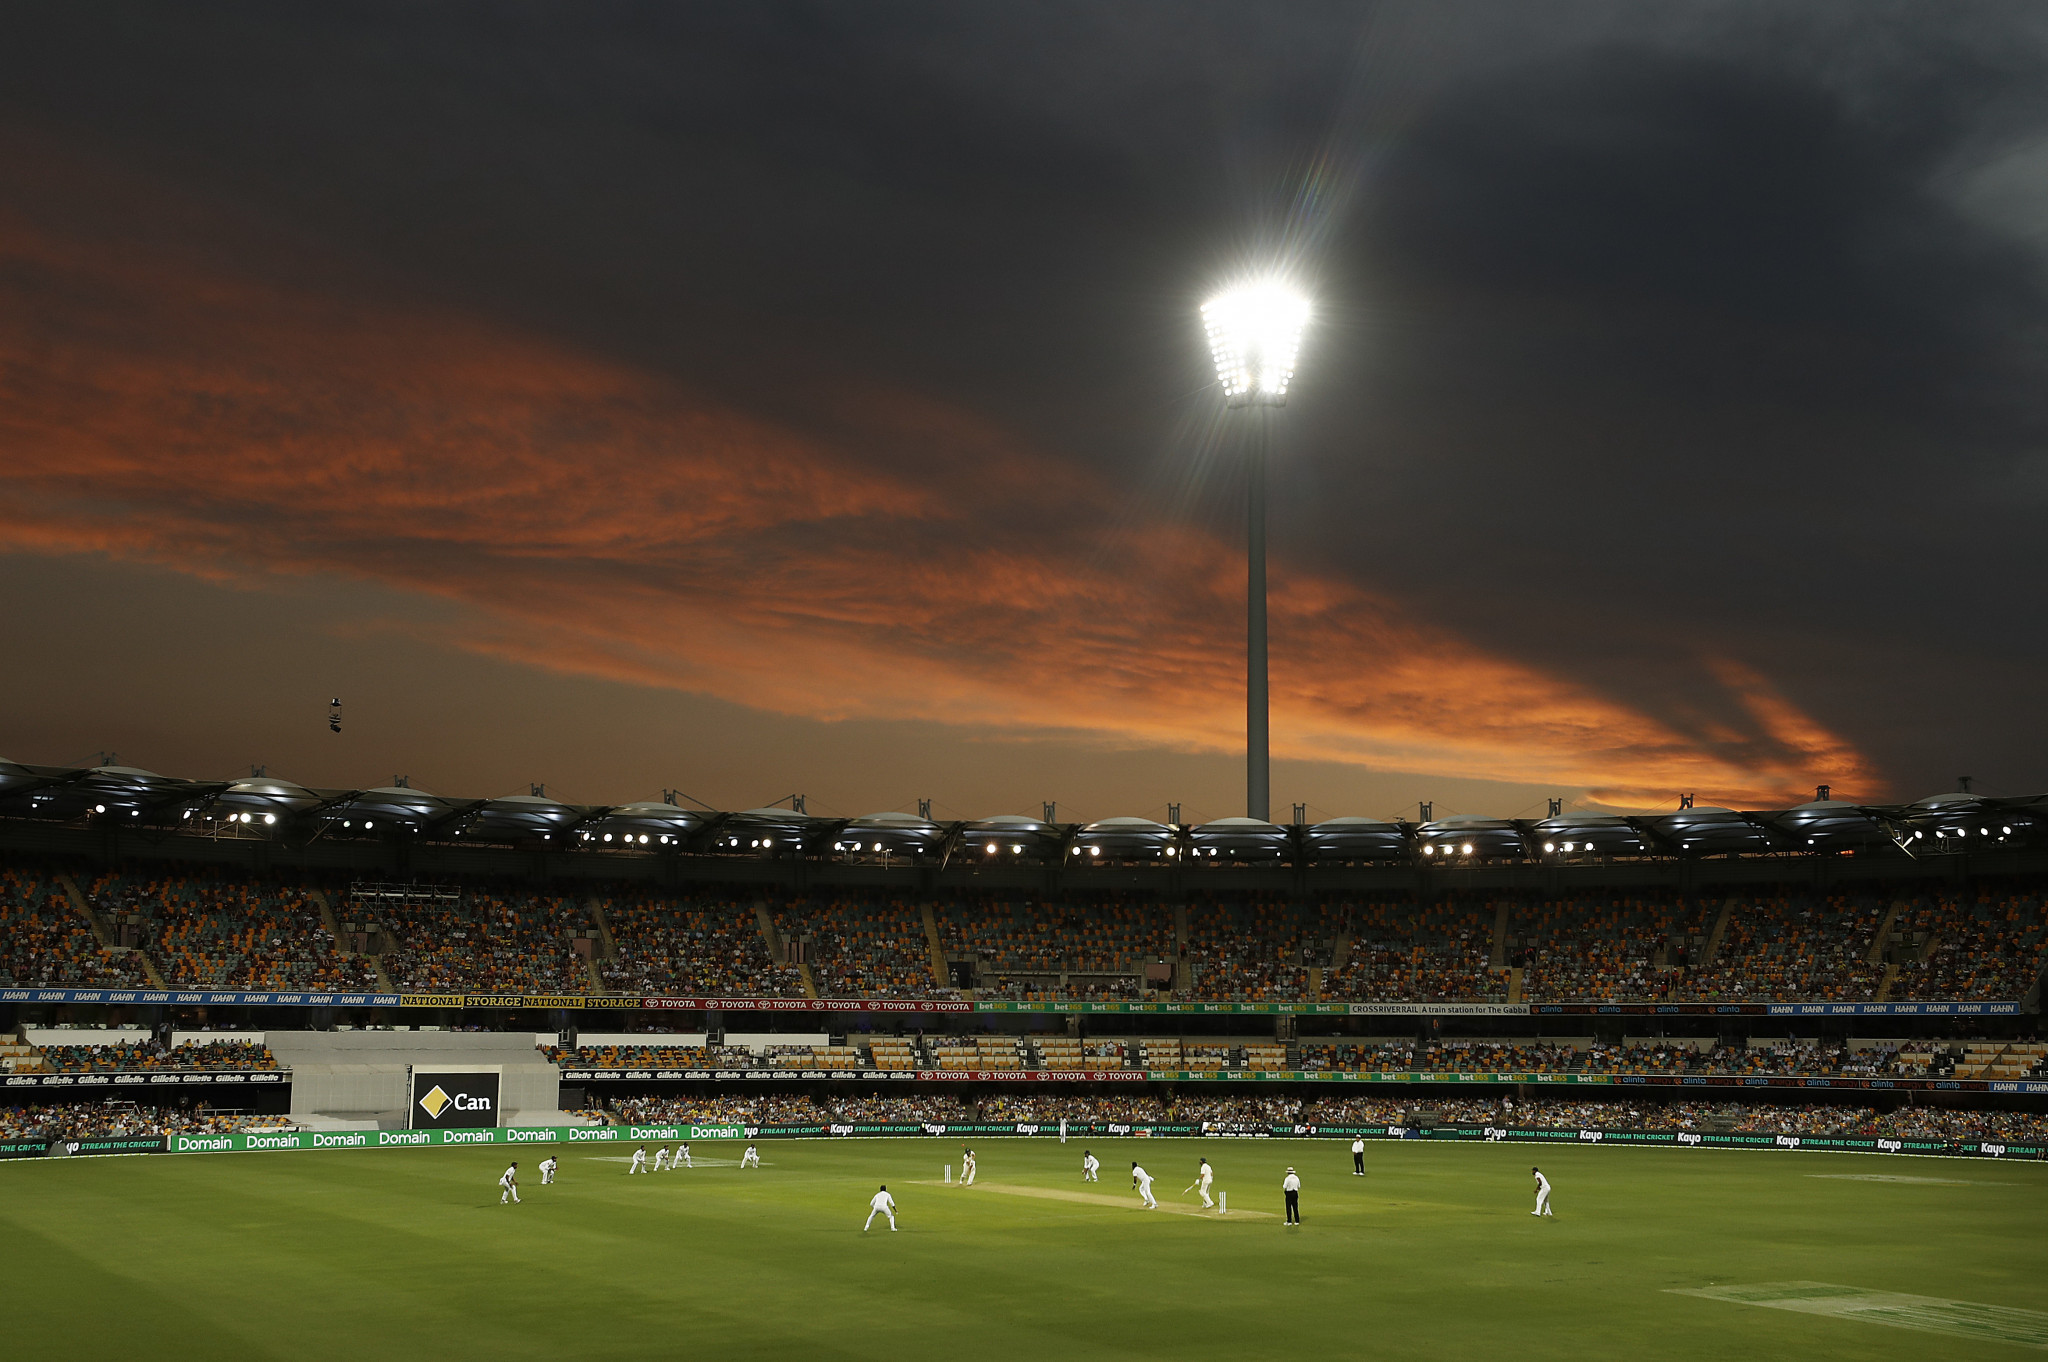 Brisbane Cricket Ground, commonly known as the Gabba, is one of the city's best-known sporting arenas ©Getty Images